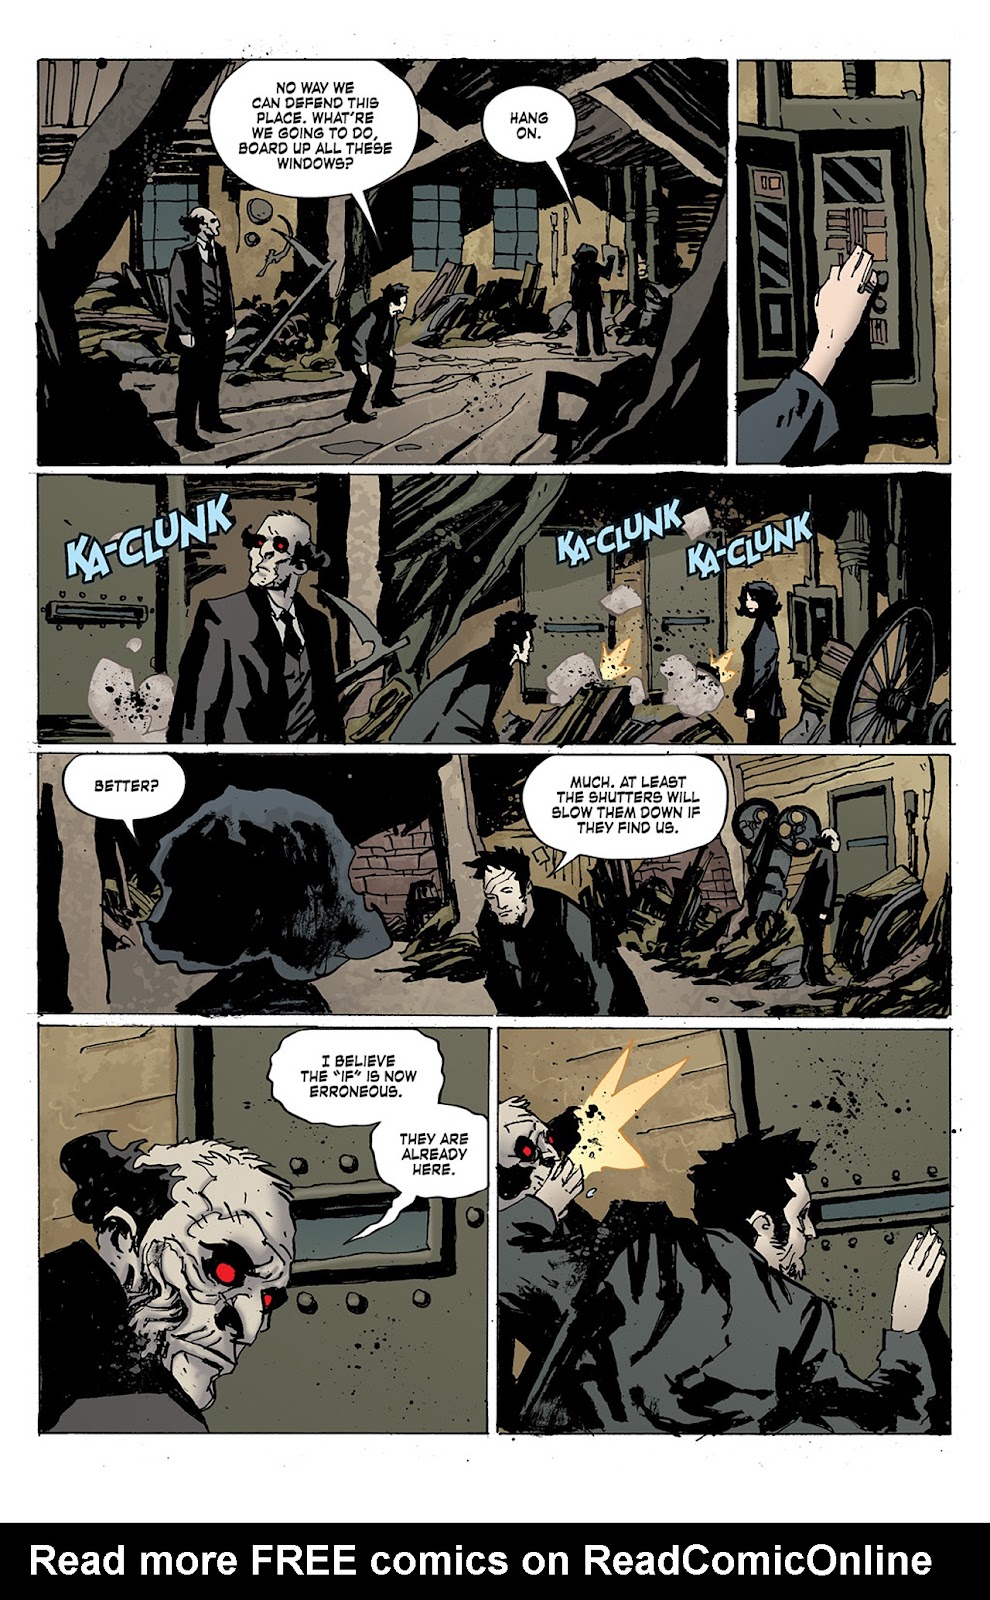 Criminal Macabre: Final Night - The 30 Days of Night Crossover issue 3 - Page 14